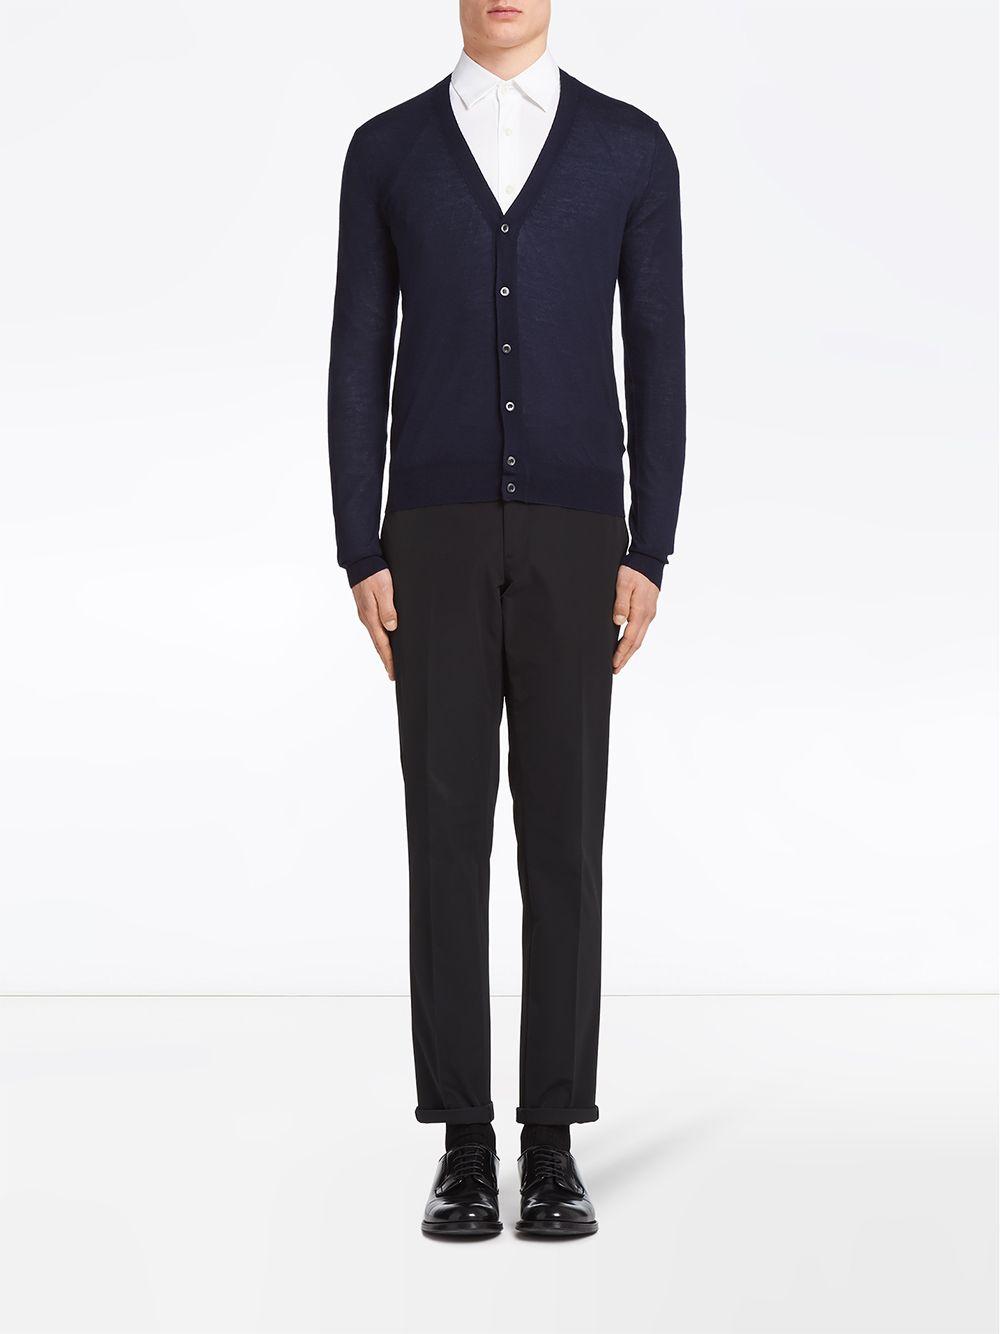 Prada Cashmere Knitted Cardigan in Blue for Men - Lyst